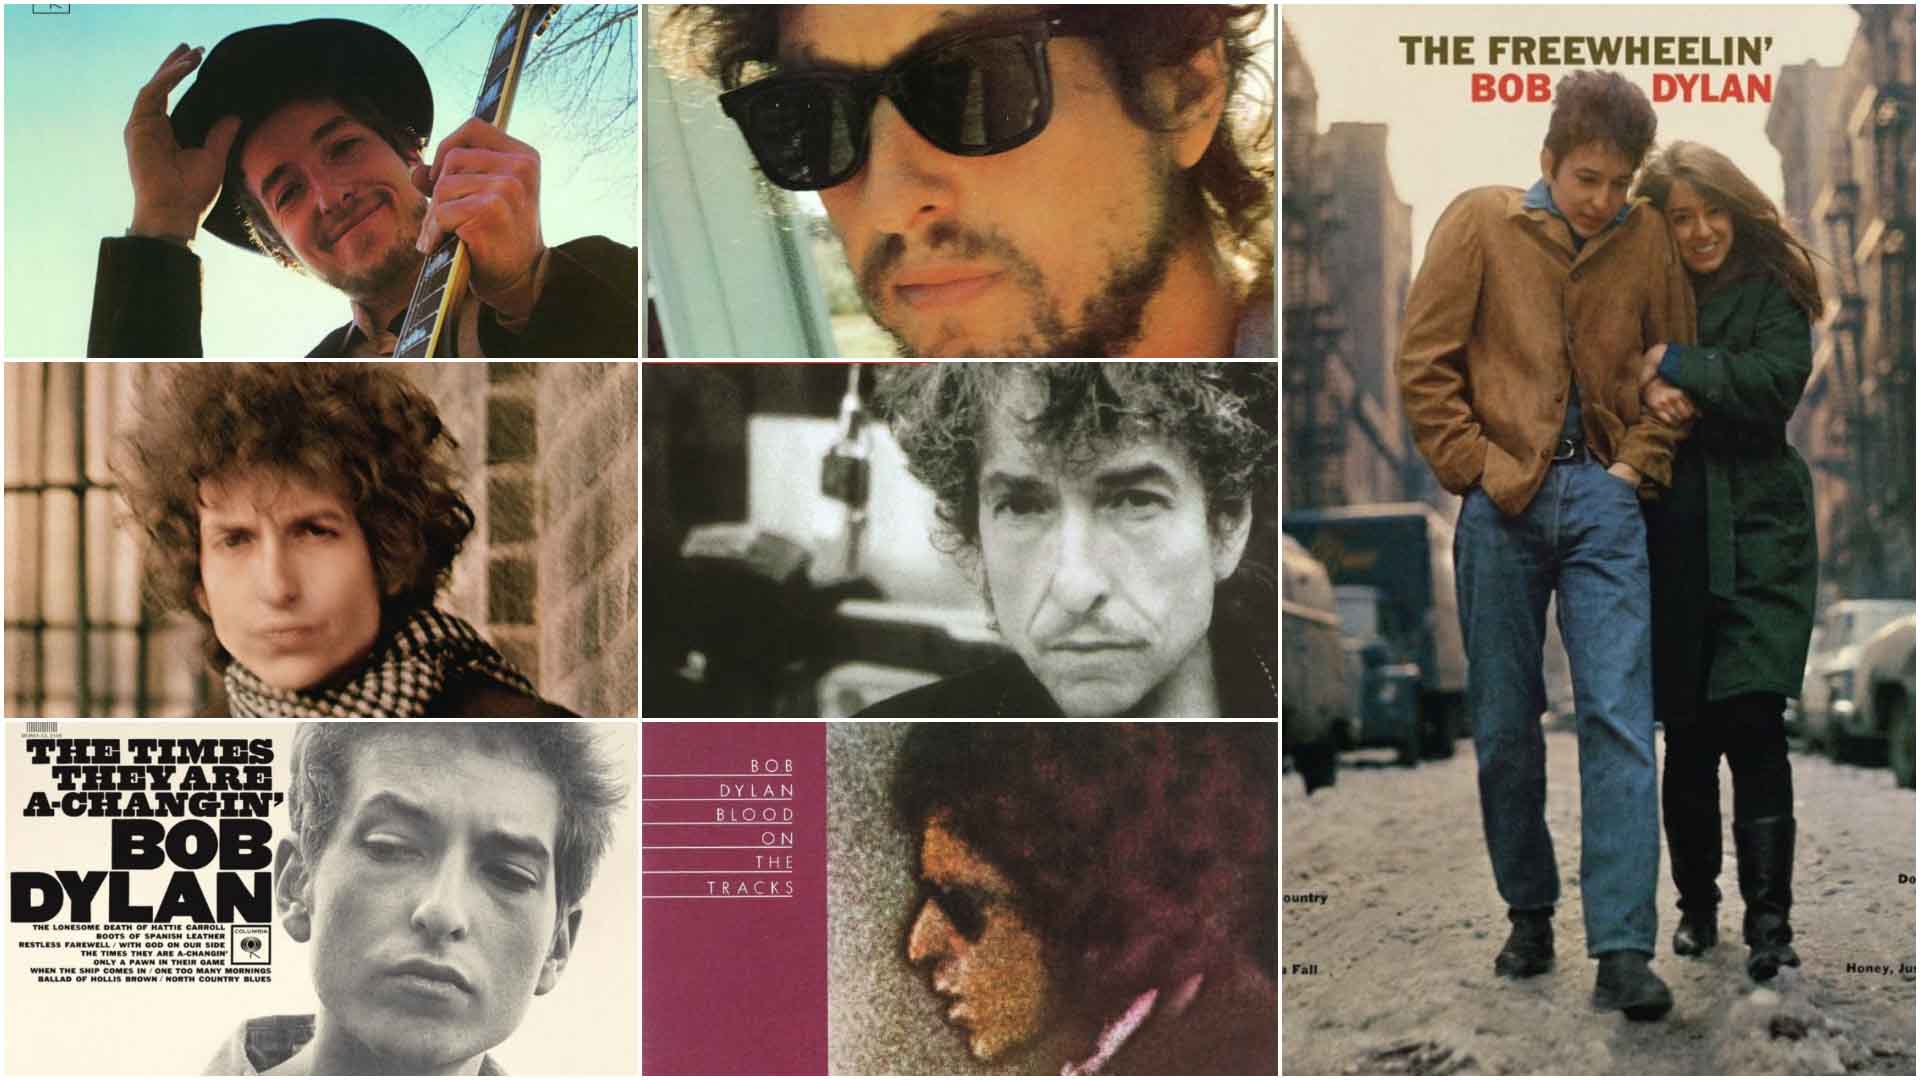 Best Bob Dylan Lyrics 50 Pieces Of Wisdom From The Best Bob Dylan Songs